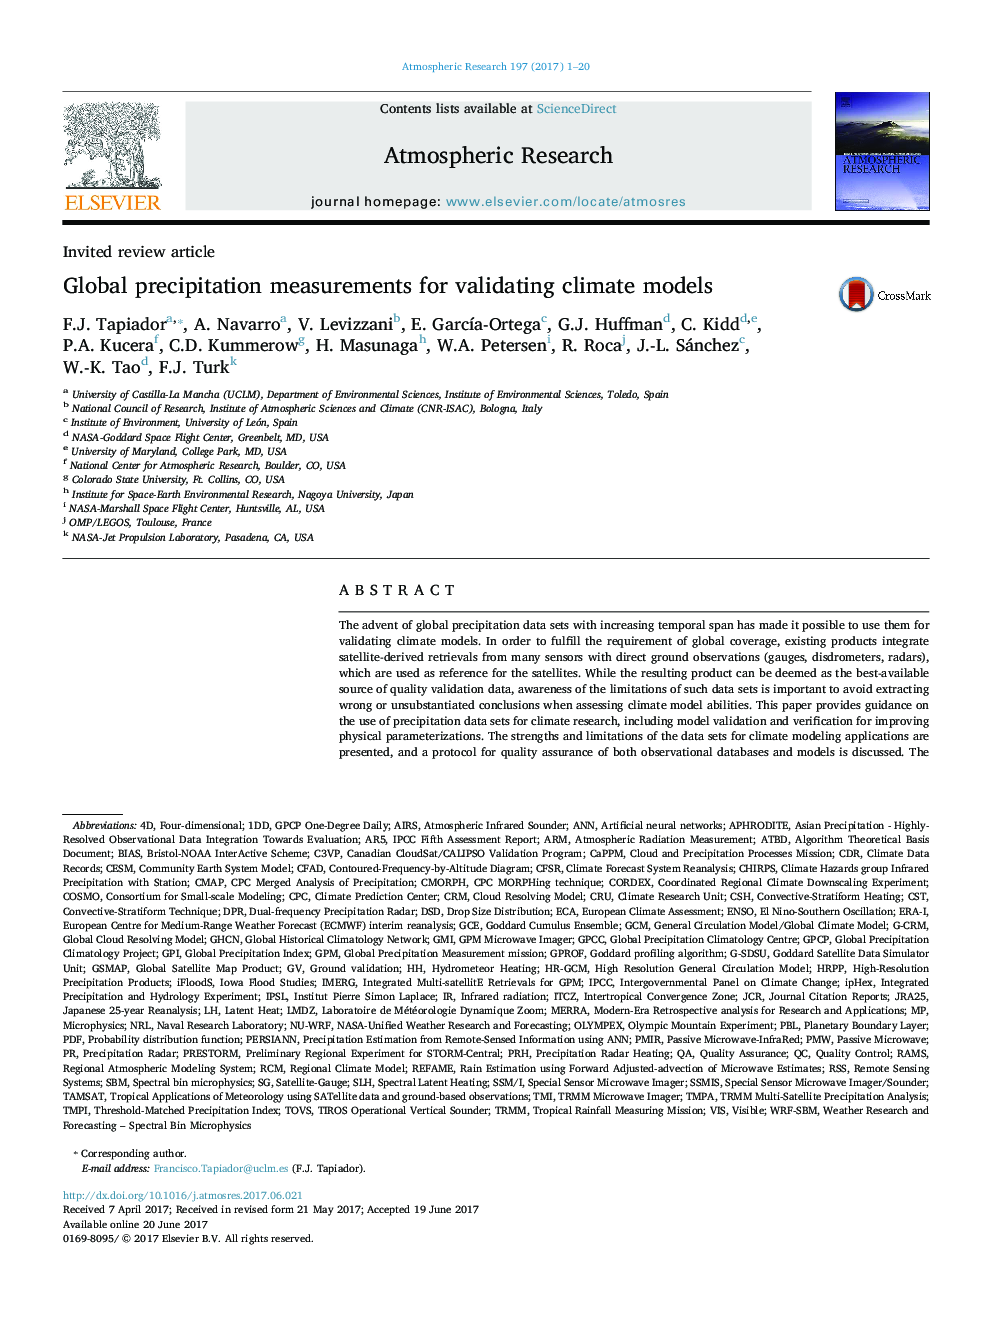 Invited review articleGlobal precipitation measurements for validating climate models